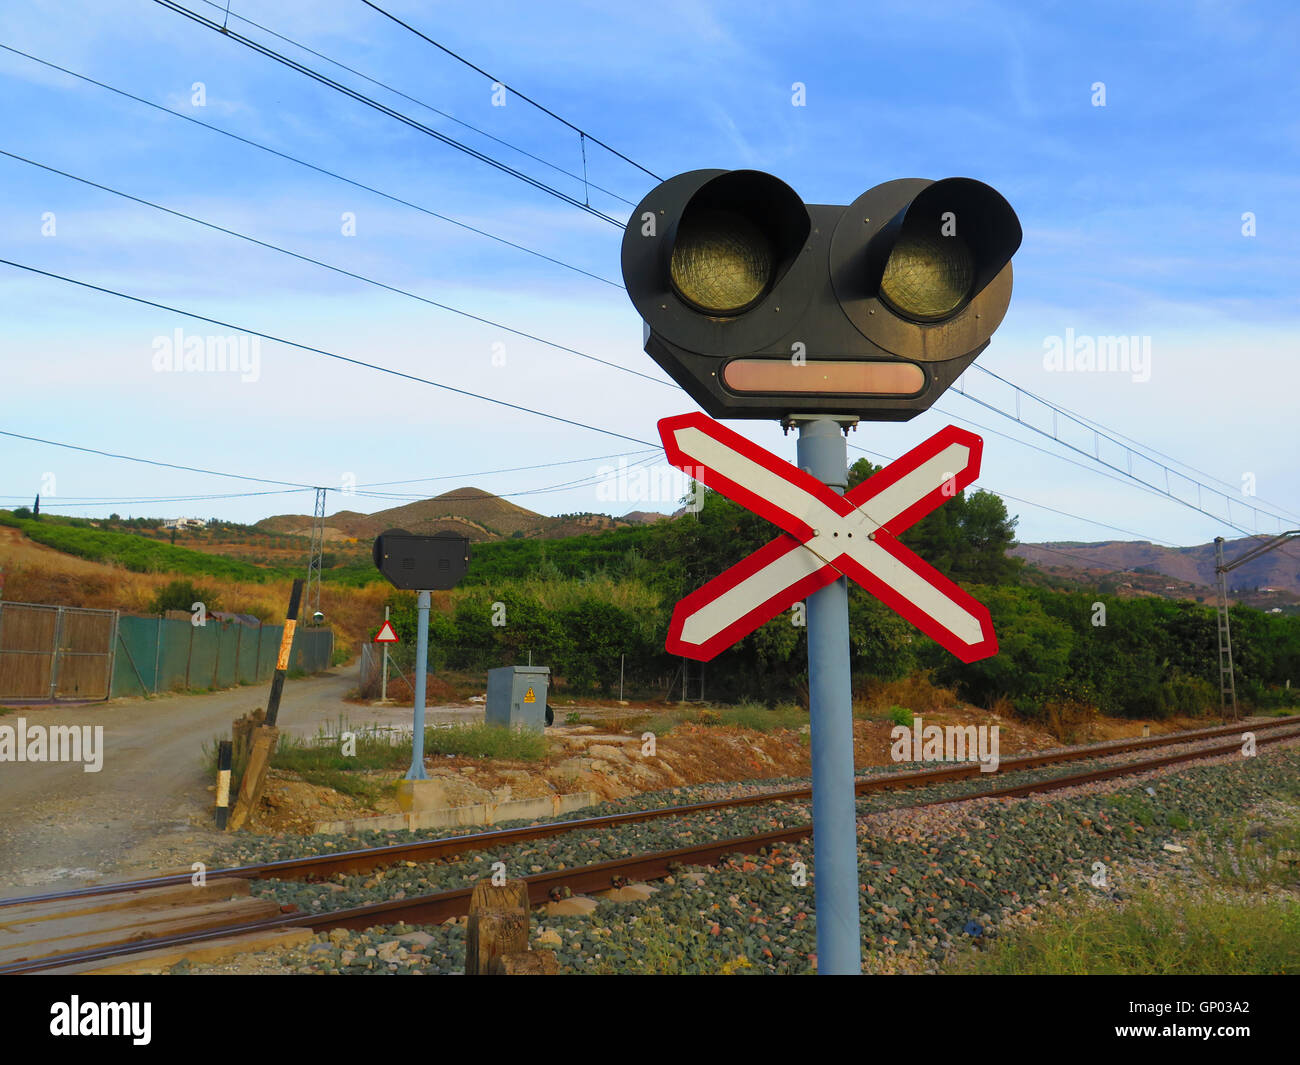 Unguarded Railway Crossing High Resolution Stock Photography And Images Alamy